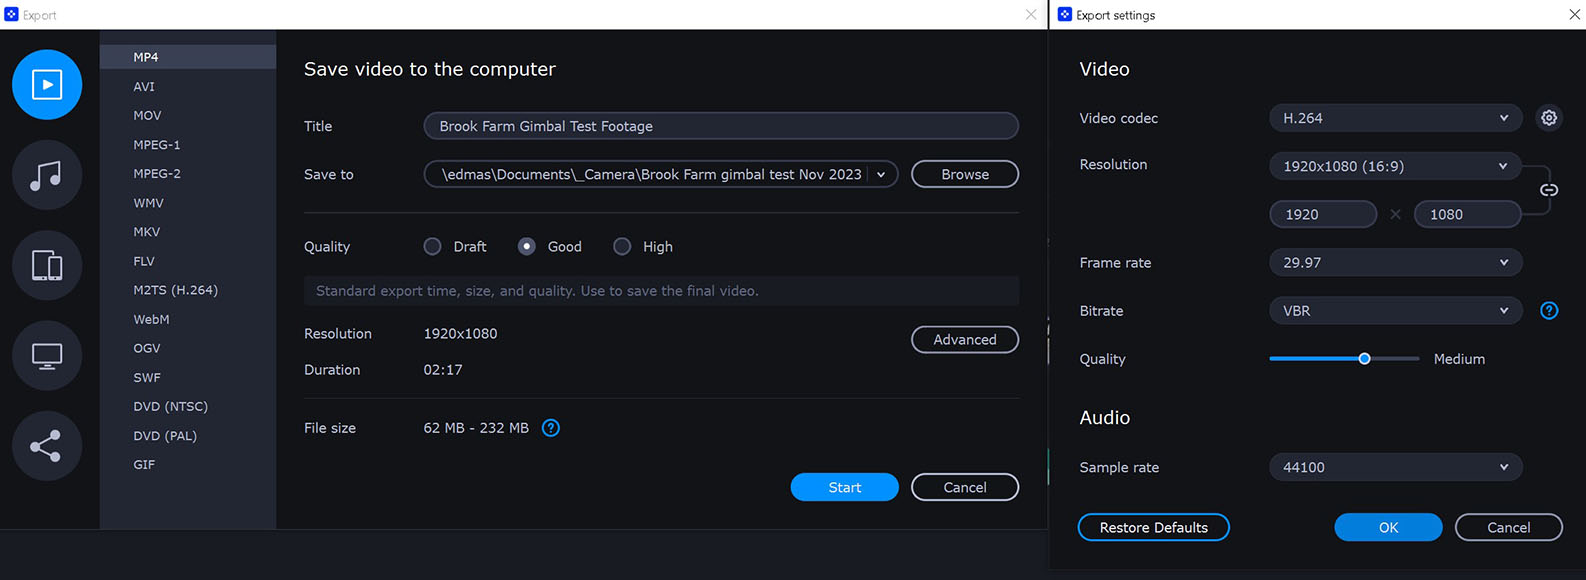 A screen shot of the export settings for Movavi video editor